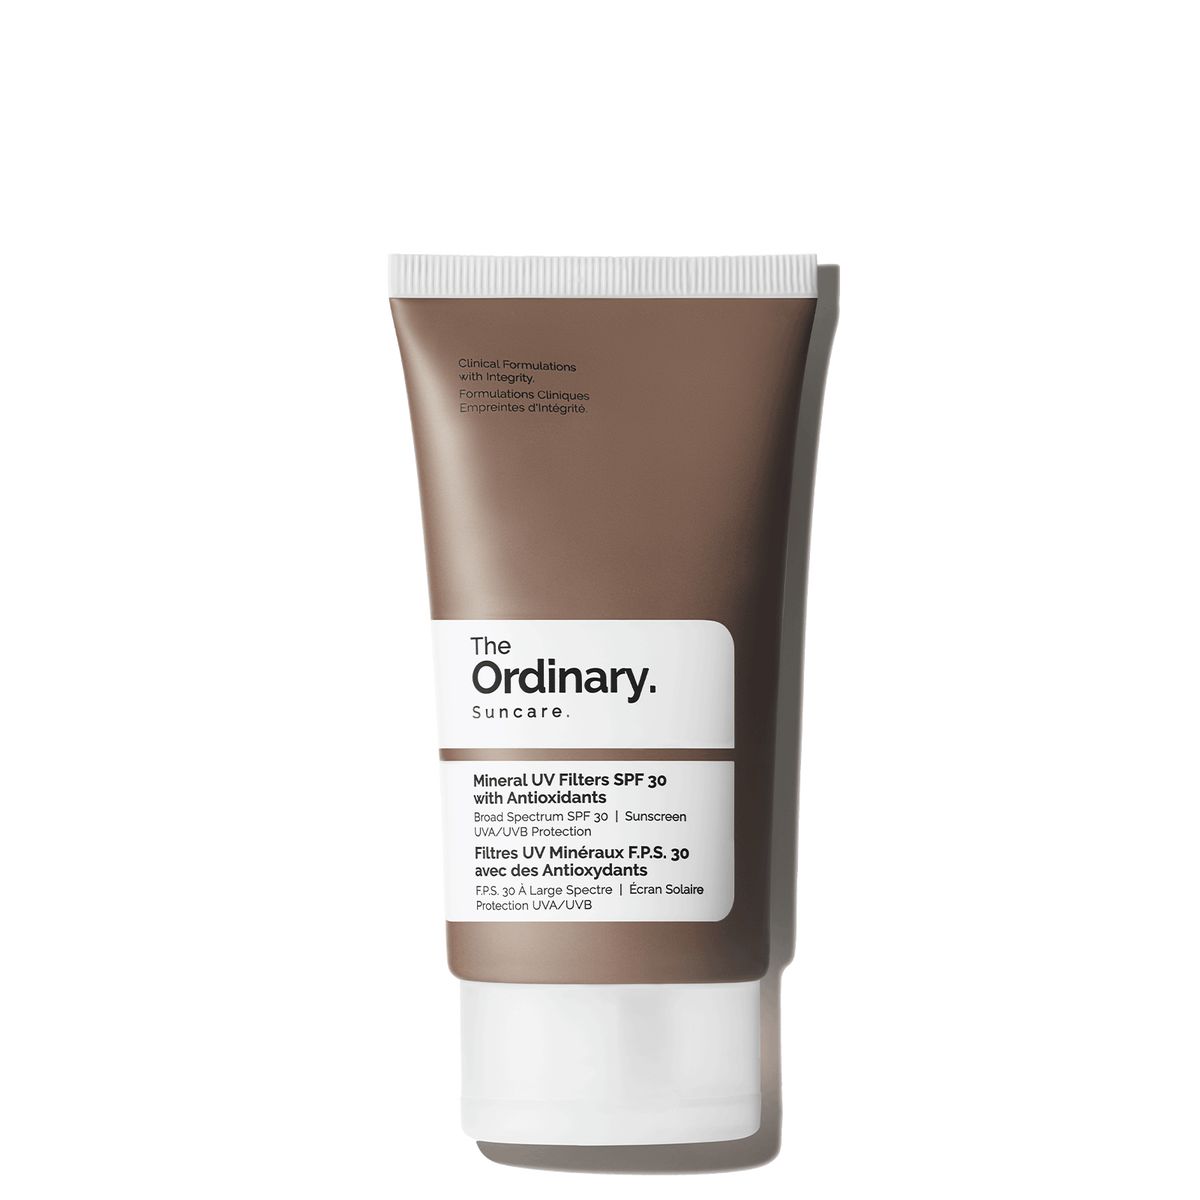 The Ordinary Mineral UV Filters SPF 30 with AntioxidantsMineral UV Filters SPF 30 with Antioxidan... | The Ordinary